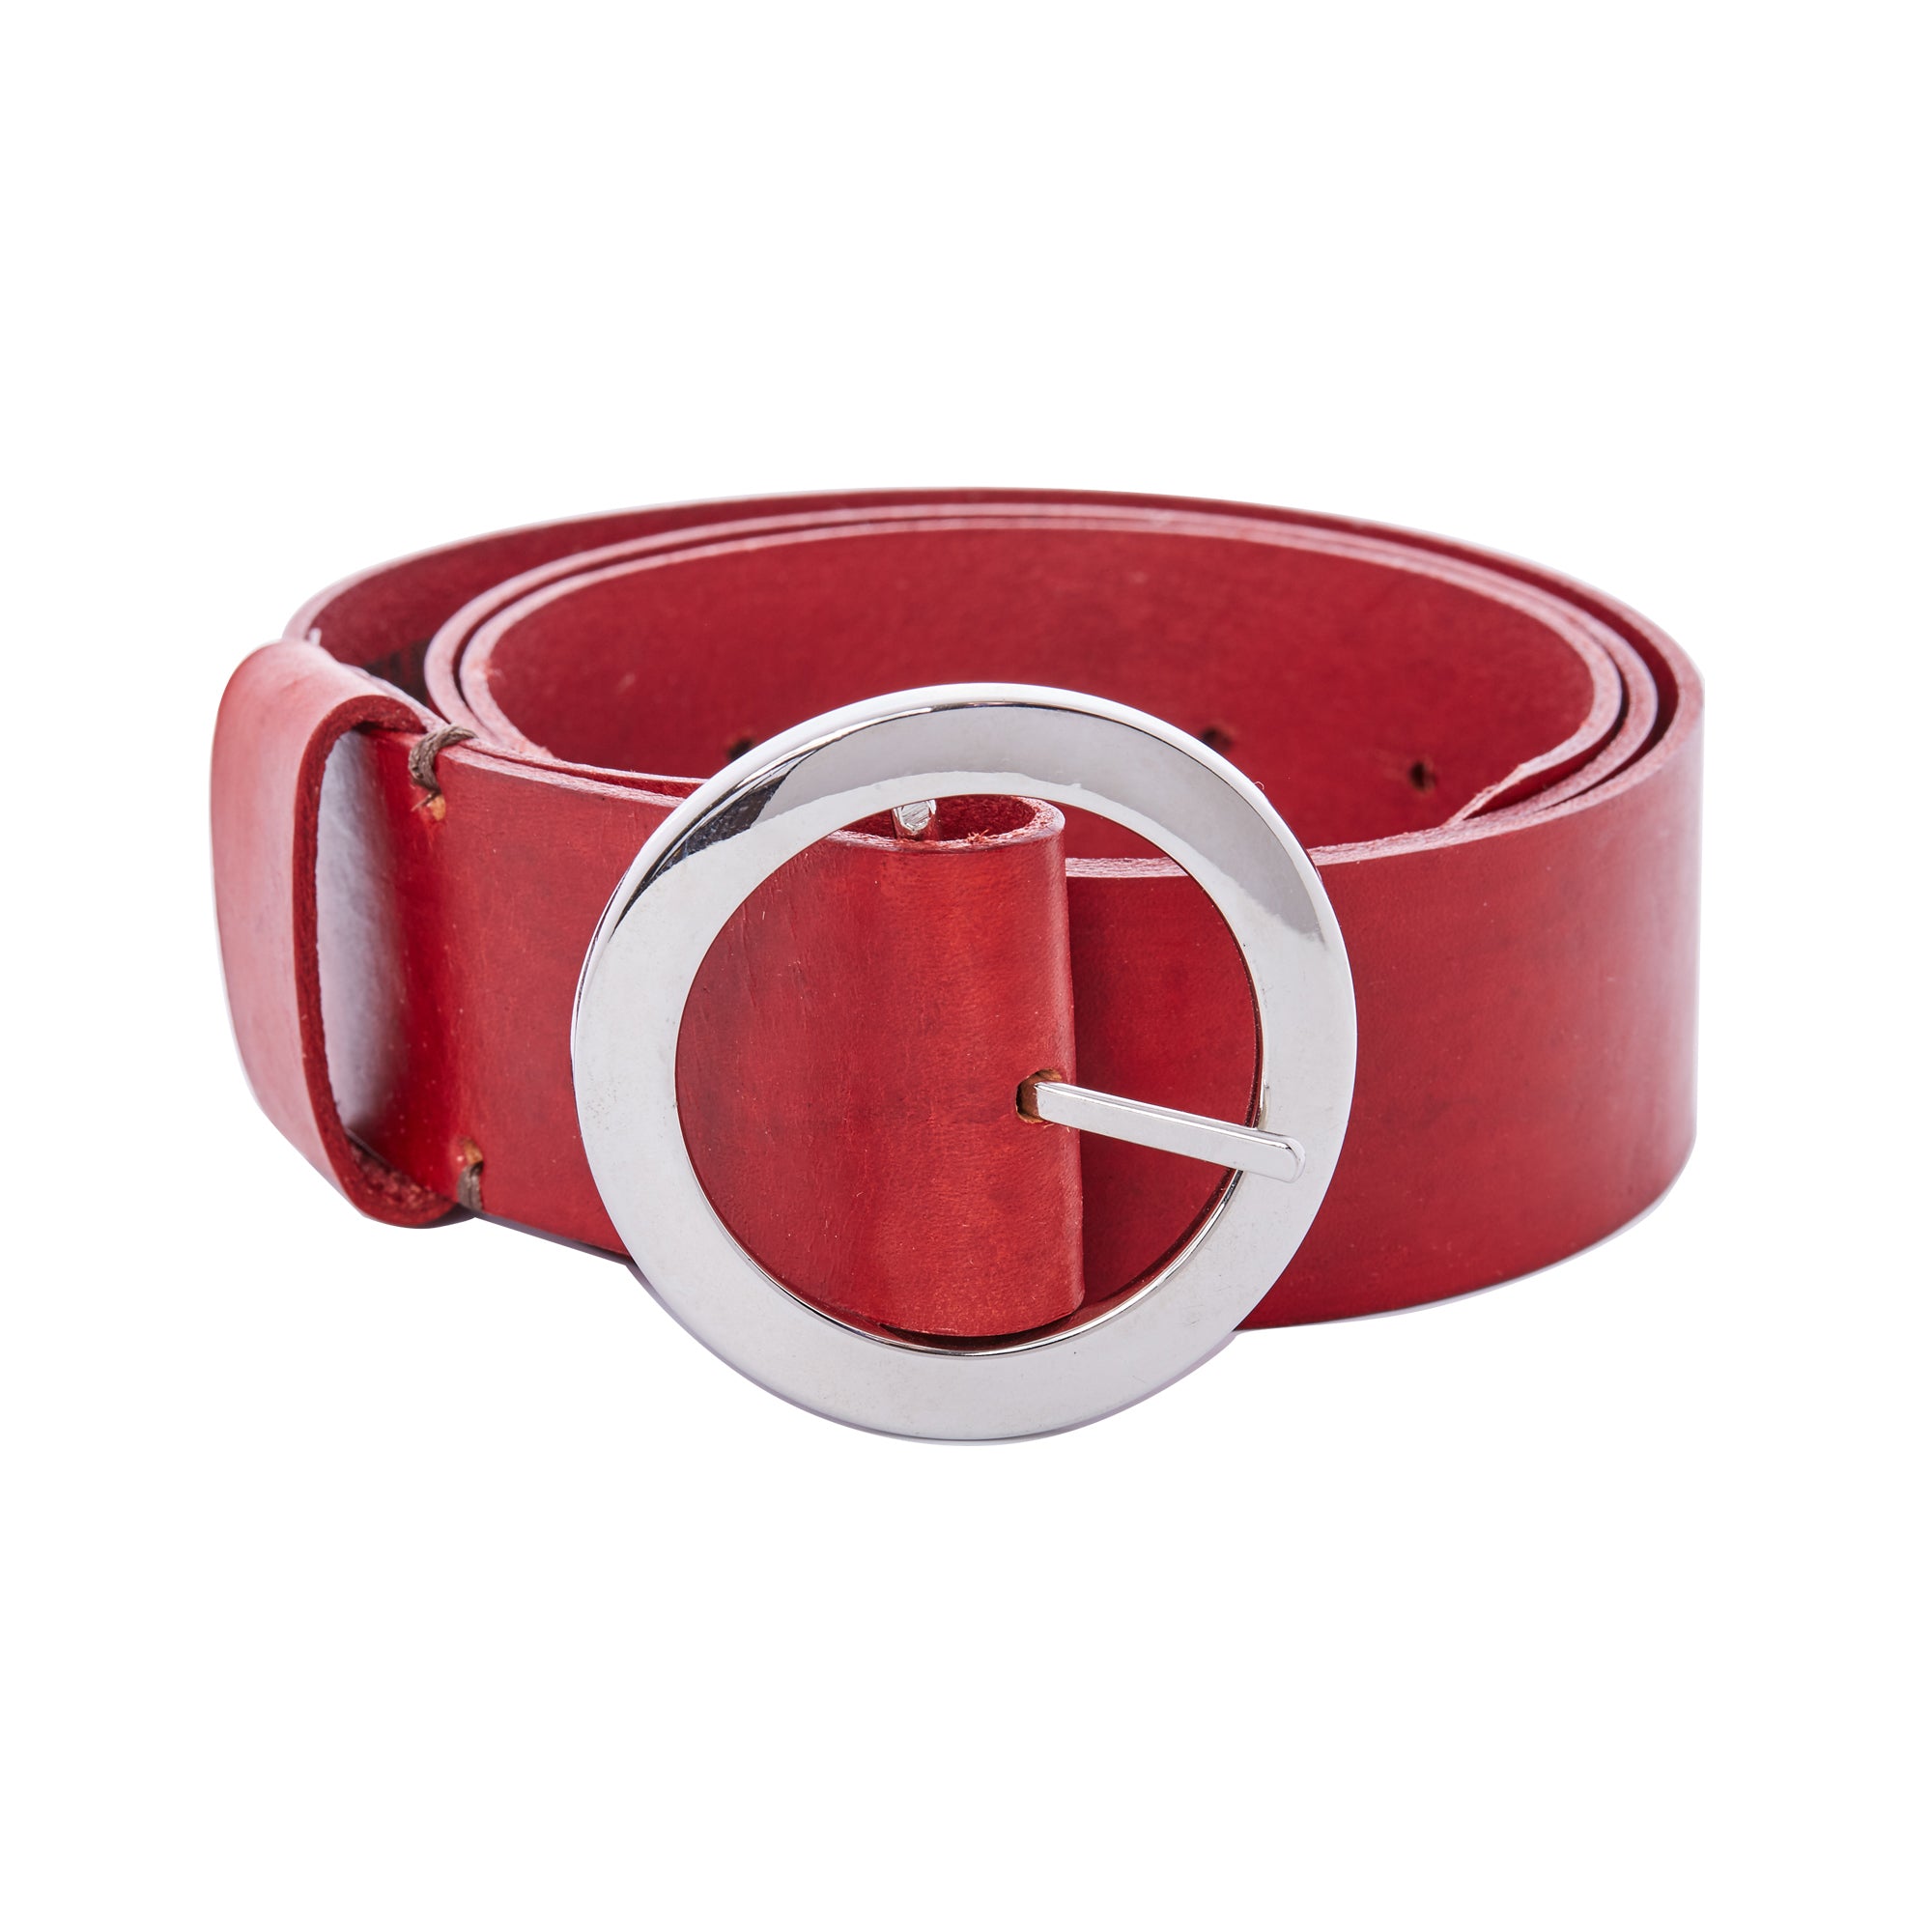 Odell 1 3/4in Cinch Belt - Available in More Colors